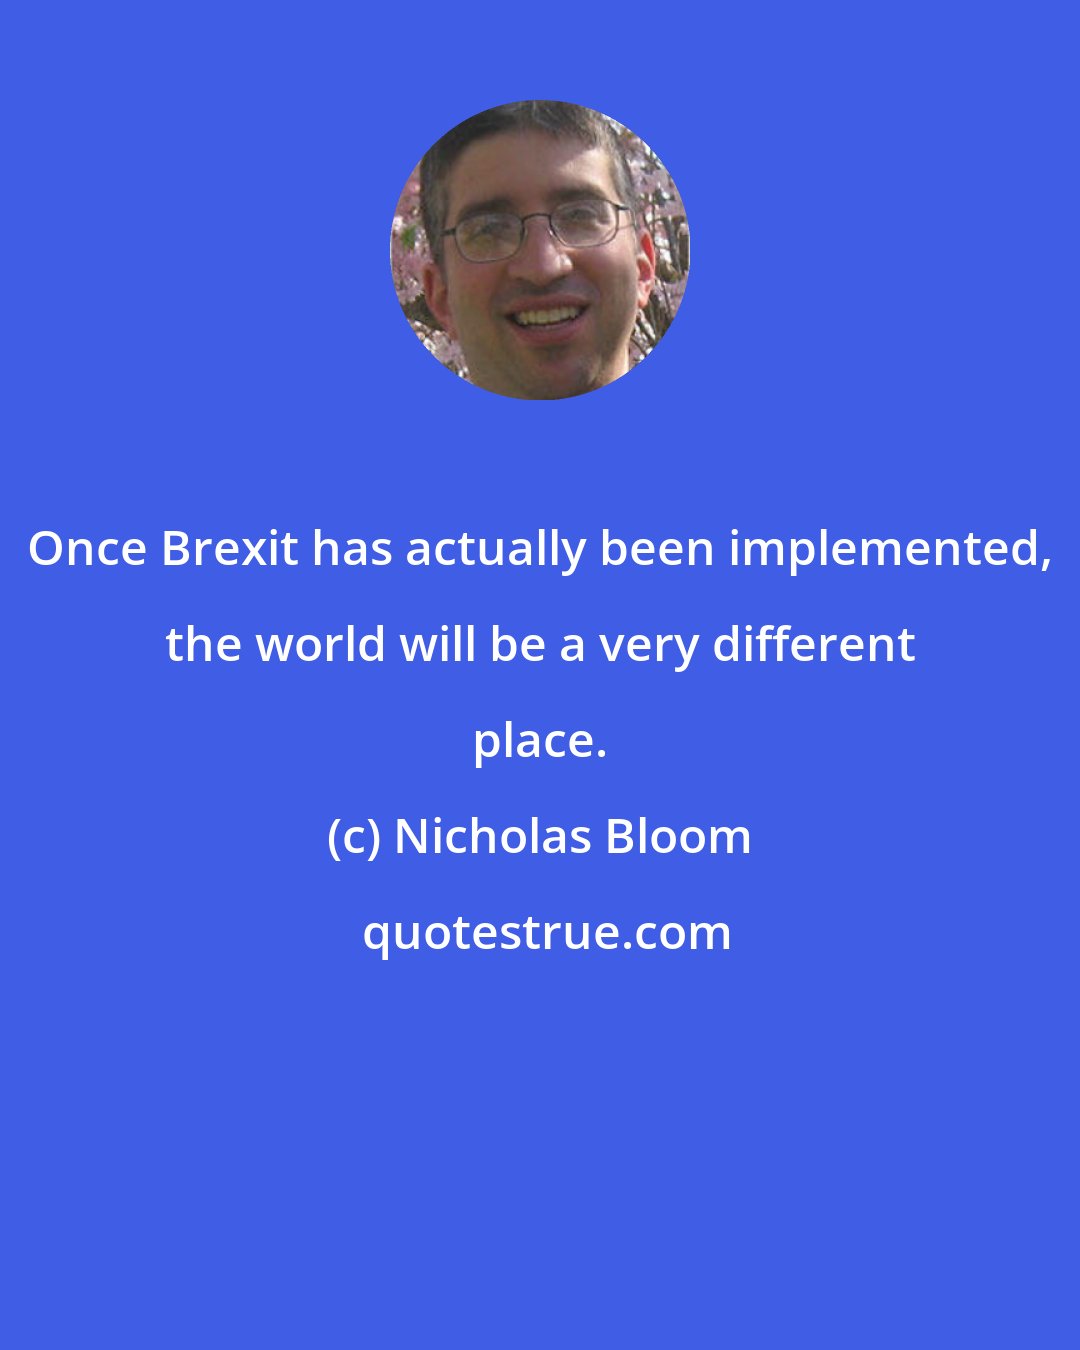 Nicholas Bloom: Once Brexit has actually been implemented, the world will be a very different place.